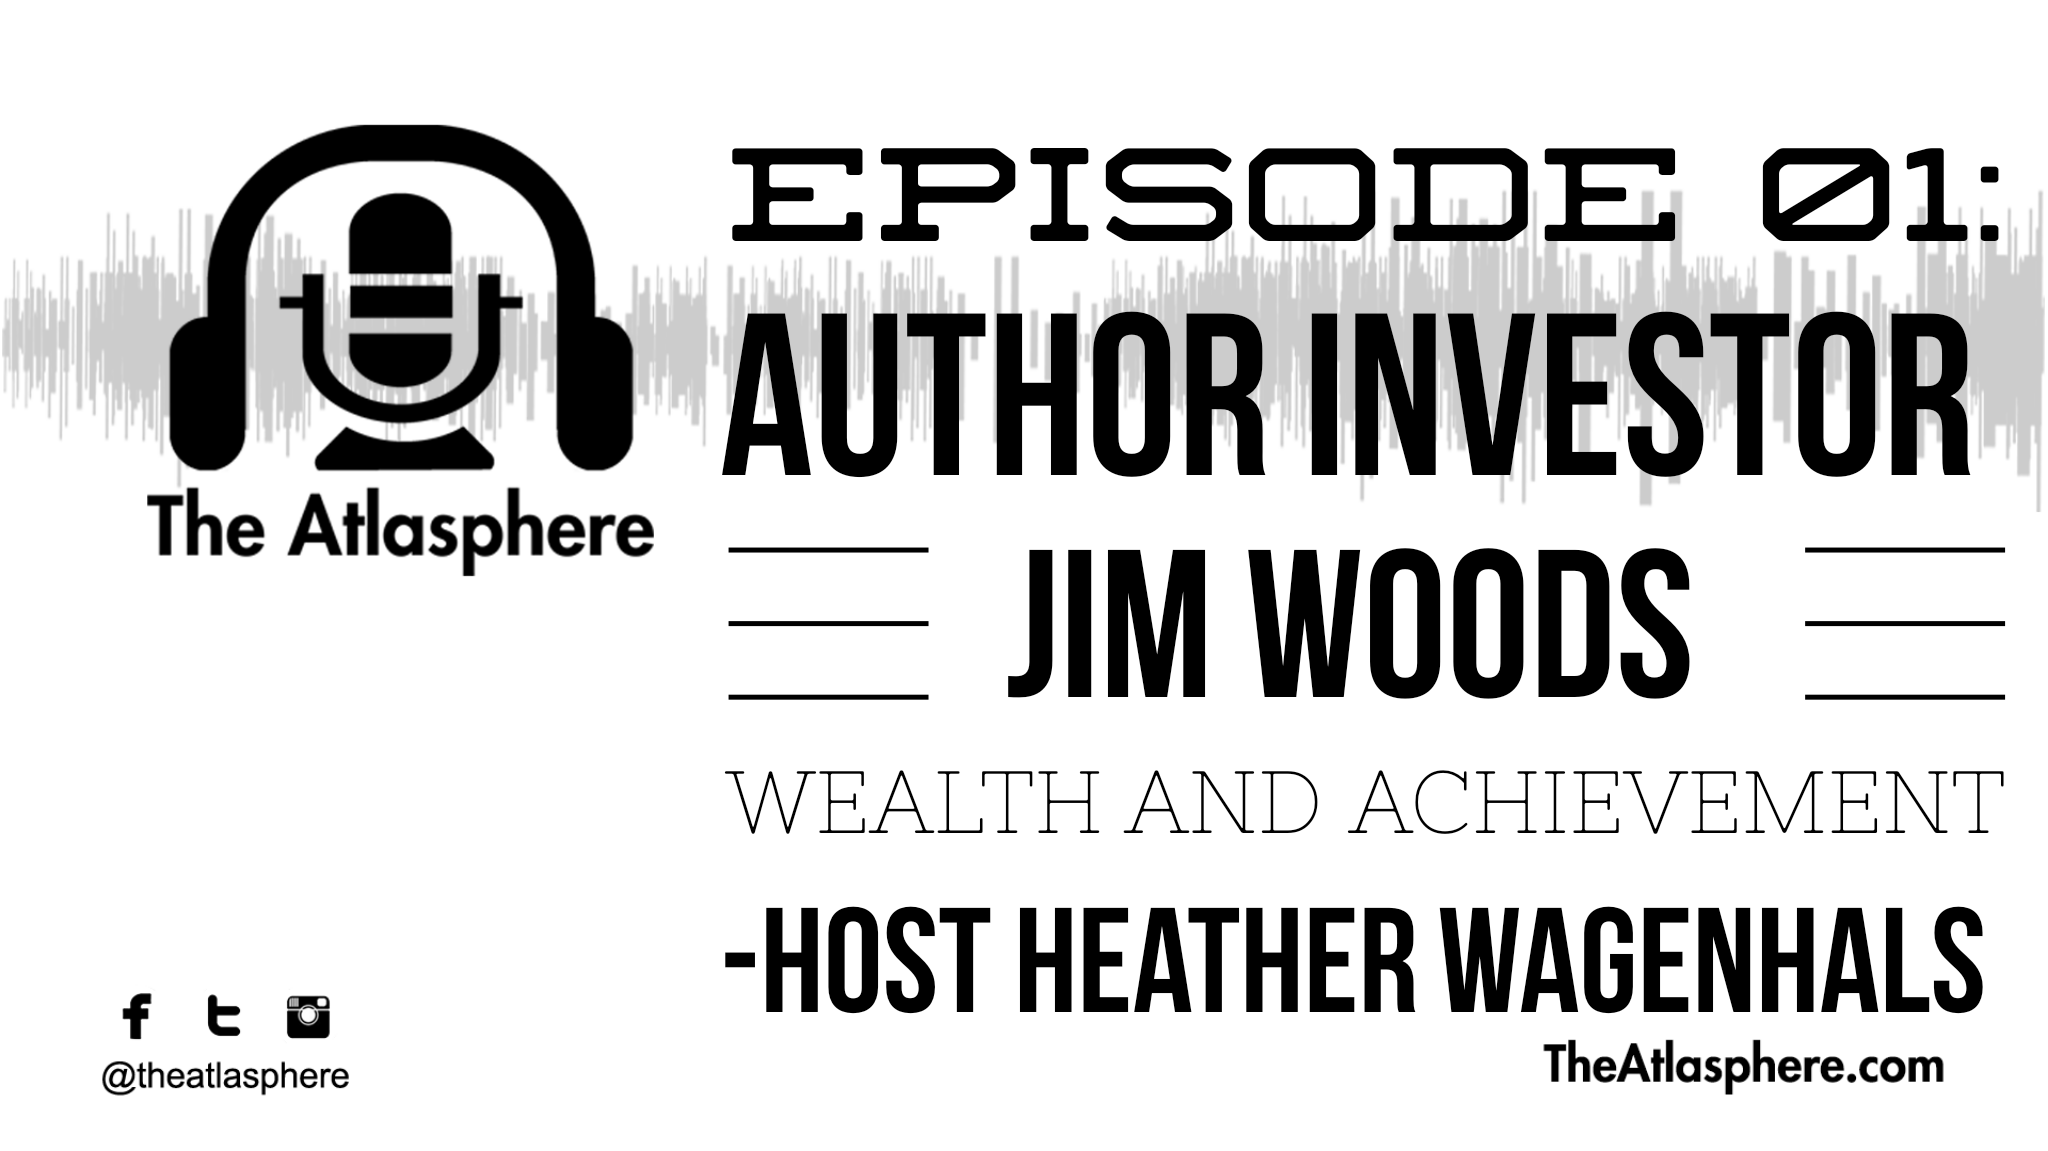 INVESTMENT AUTHOR JIM WOODS DISCUSSES WEALTH AND ACHIEVEMENT FROM THE ATLASPHERE EPISODE 01